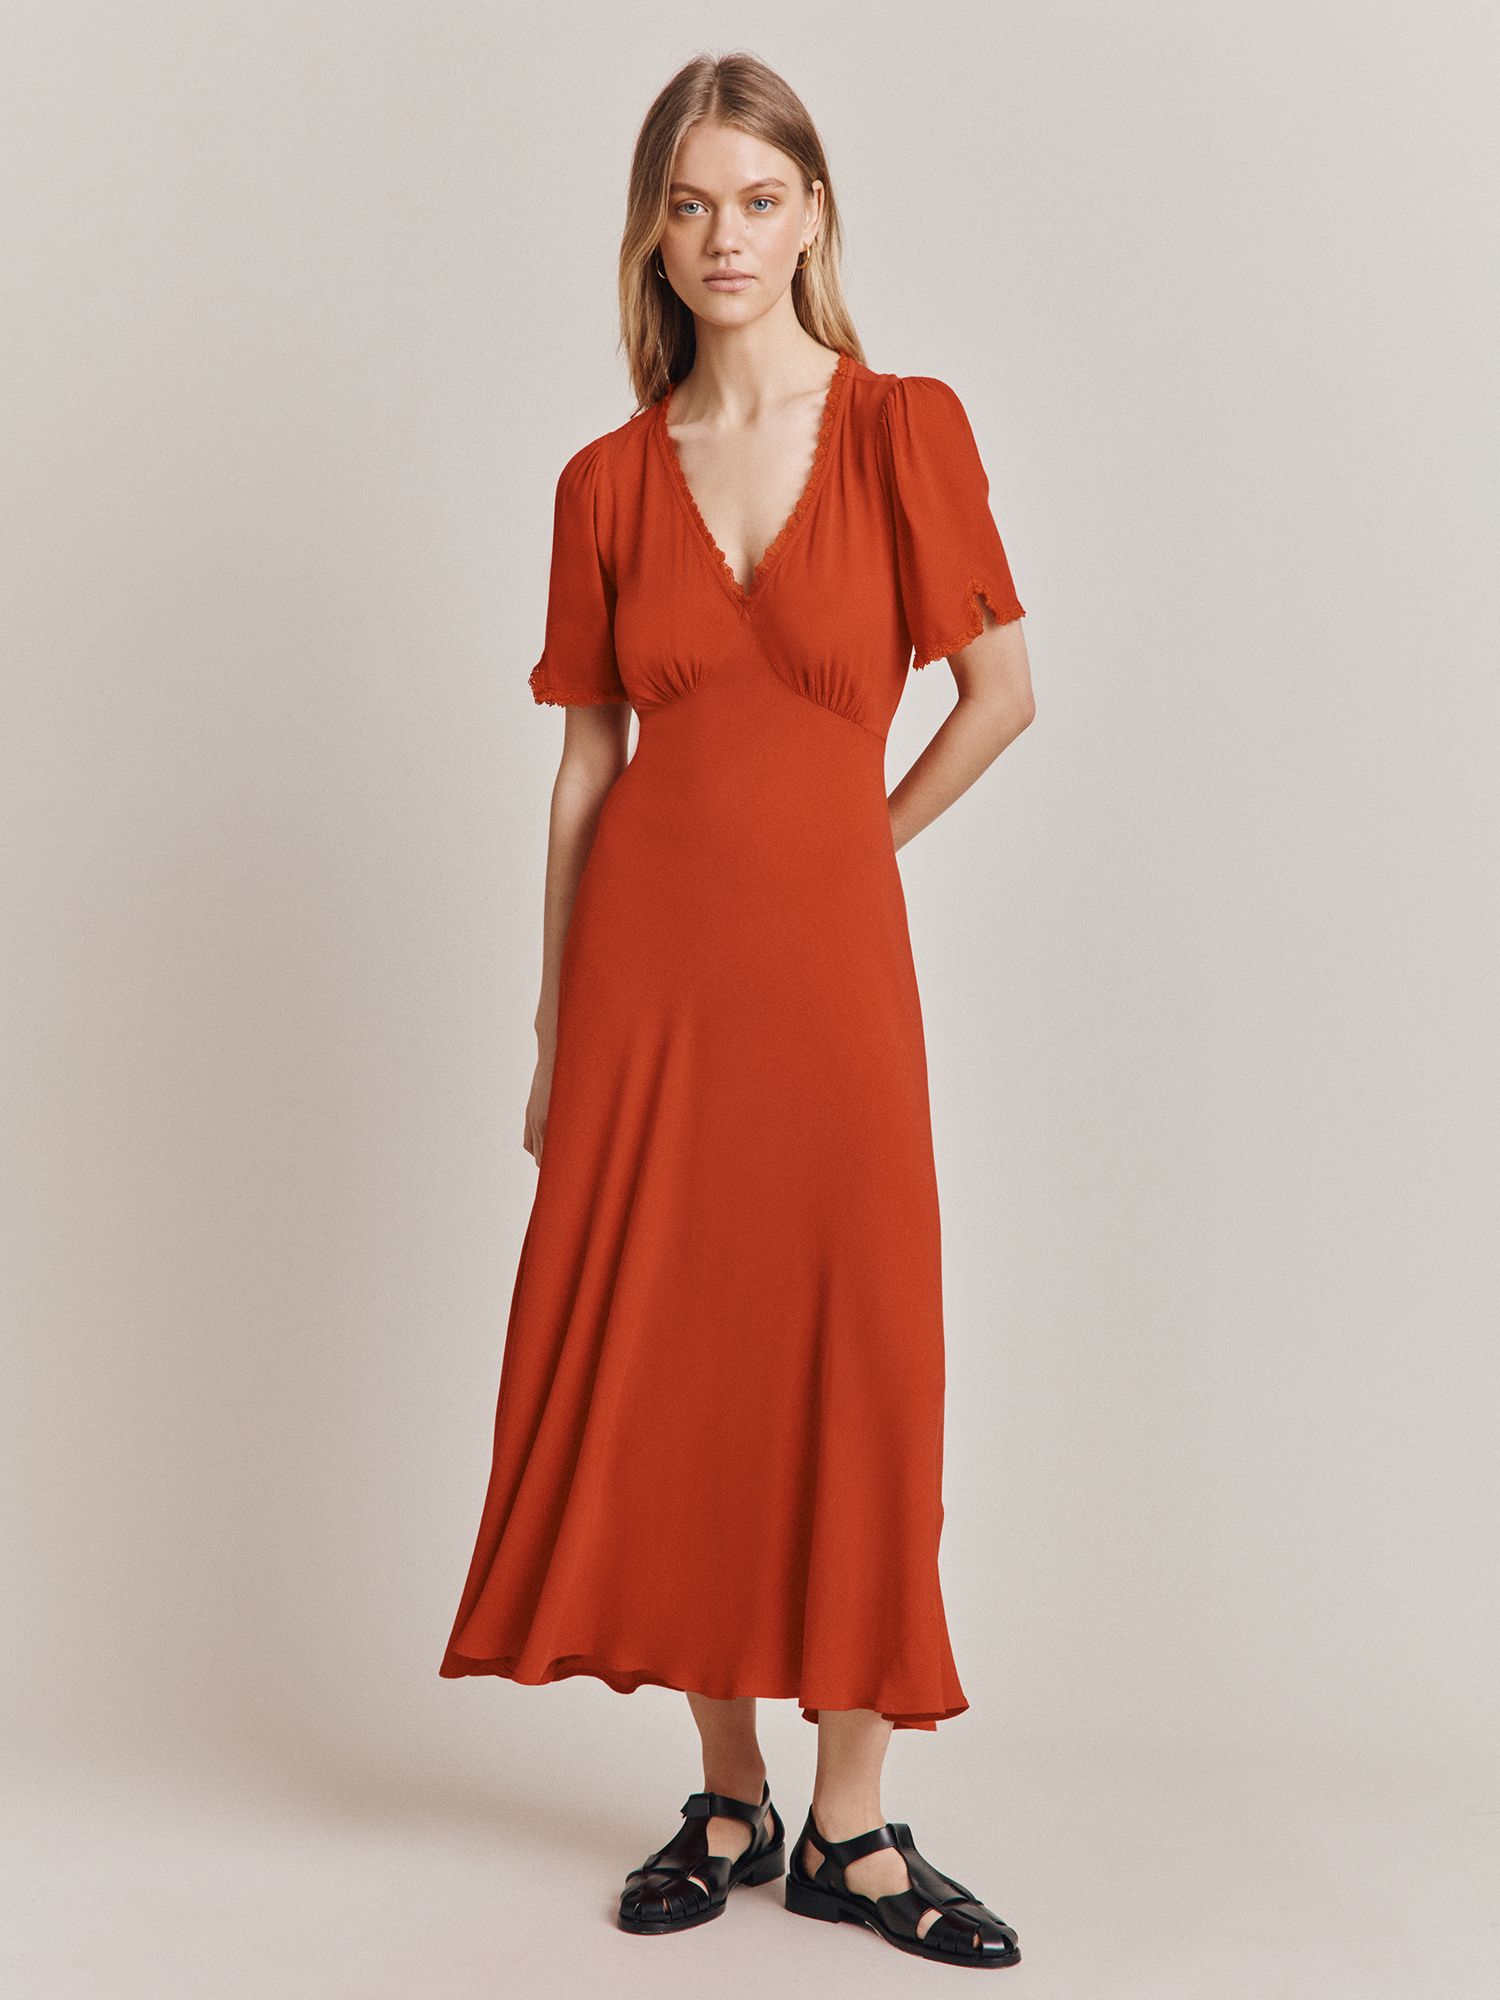 Ghost Victoria Crepe Maxi Dress, Poppy at John Lewis & Partners